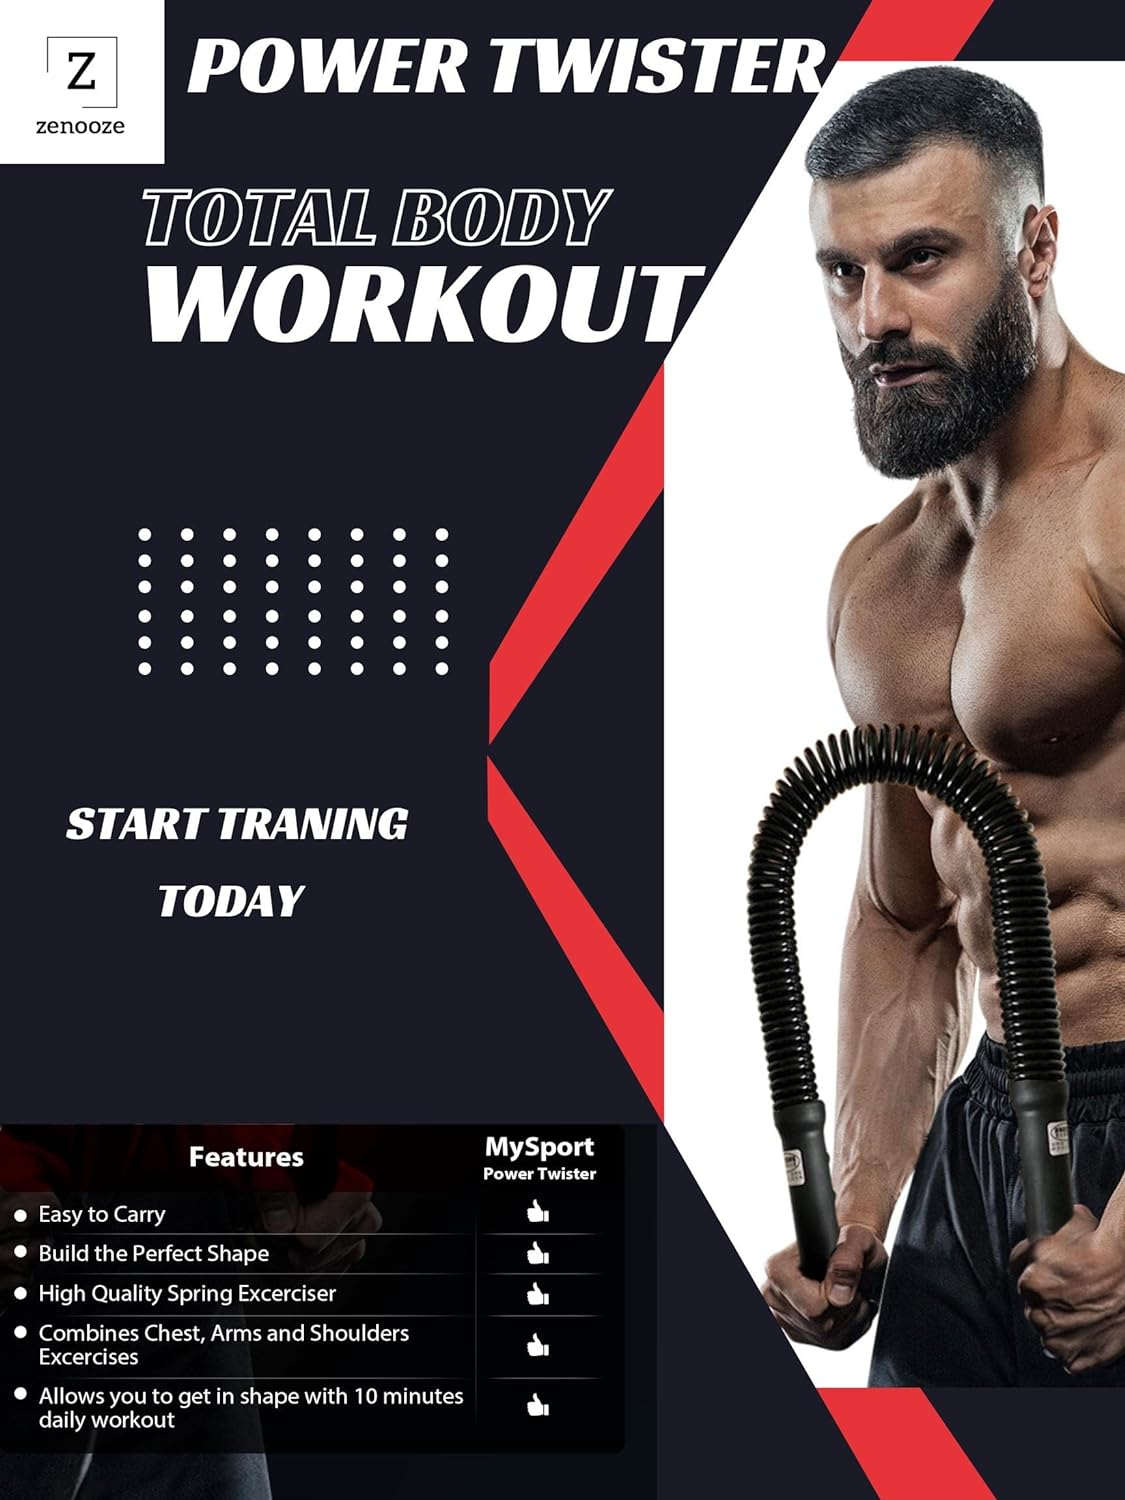 Zenoozes Power Twister Flex Bar, The Ultimate Upper Body Exercise Equipment for Strengthening Your Chest Workout, Shoulders,Biceps, Arms, Forearm Strengthener, Resorte para Hacer Ejercicio